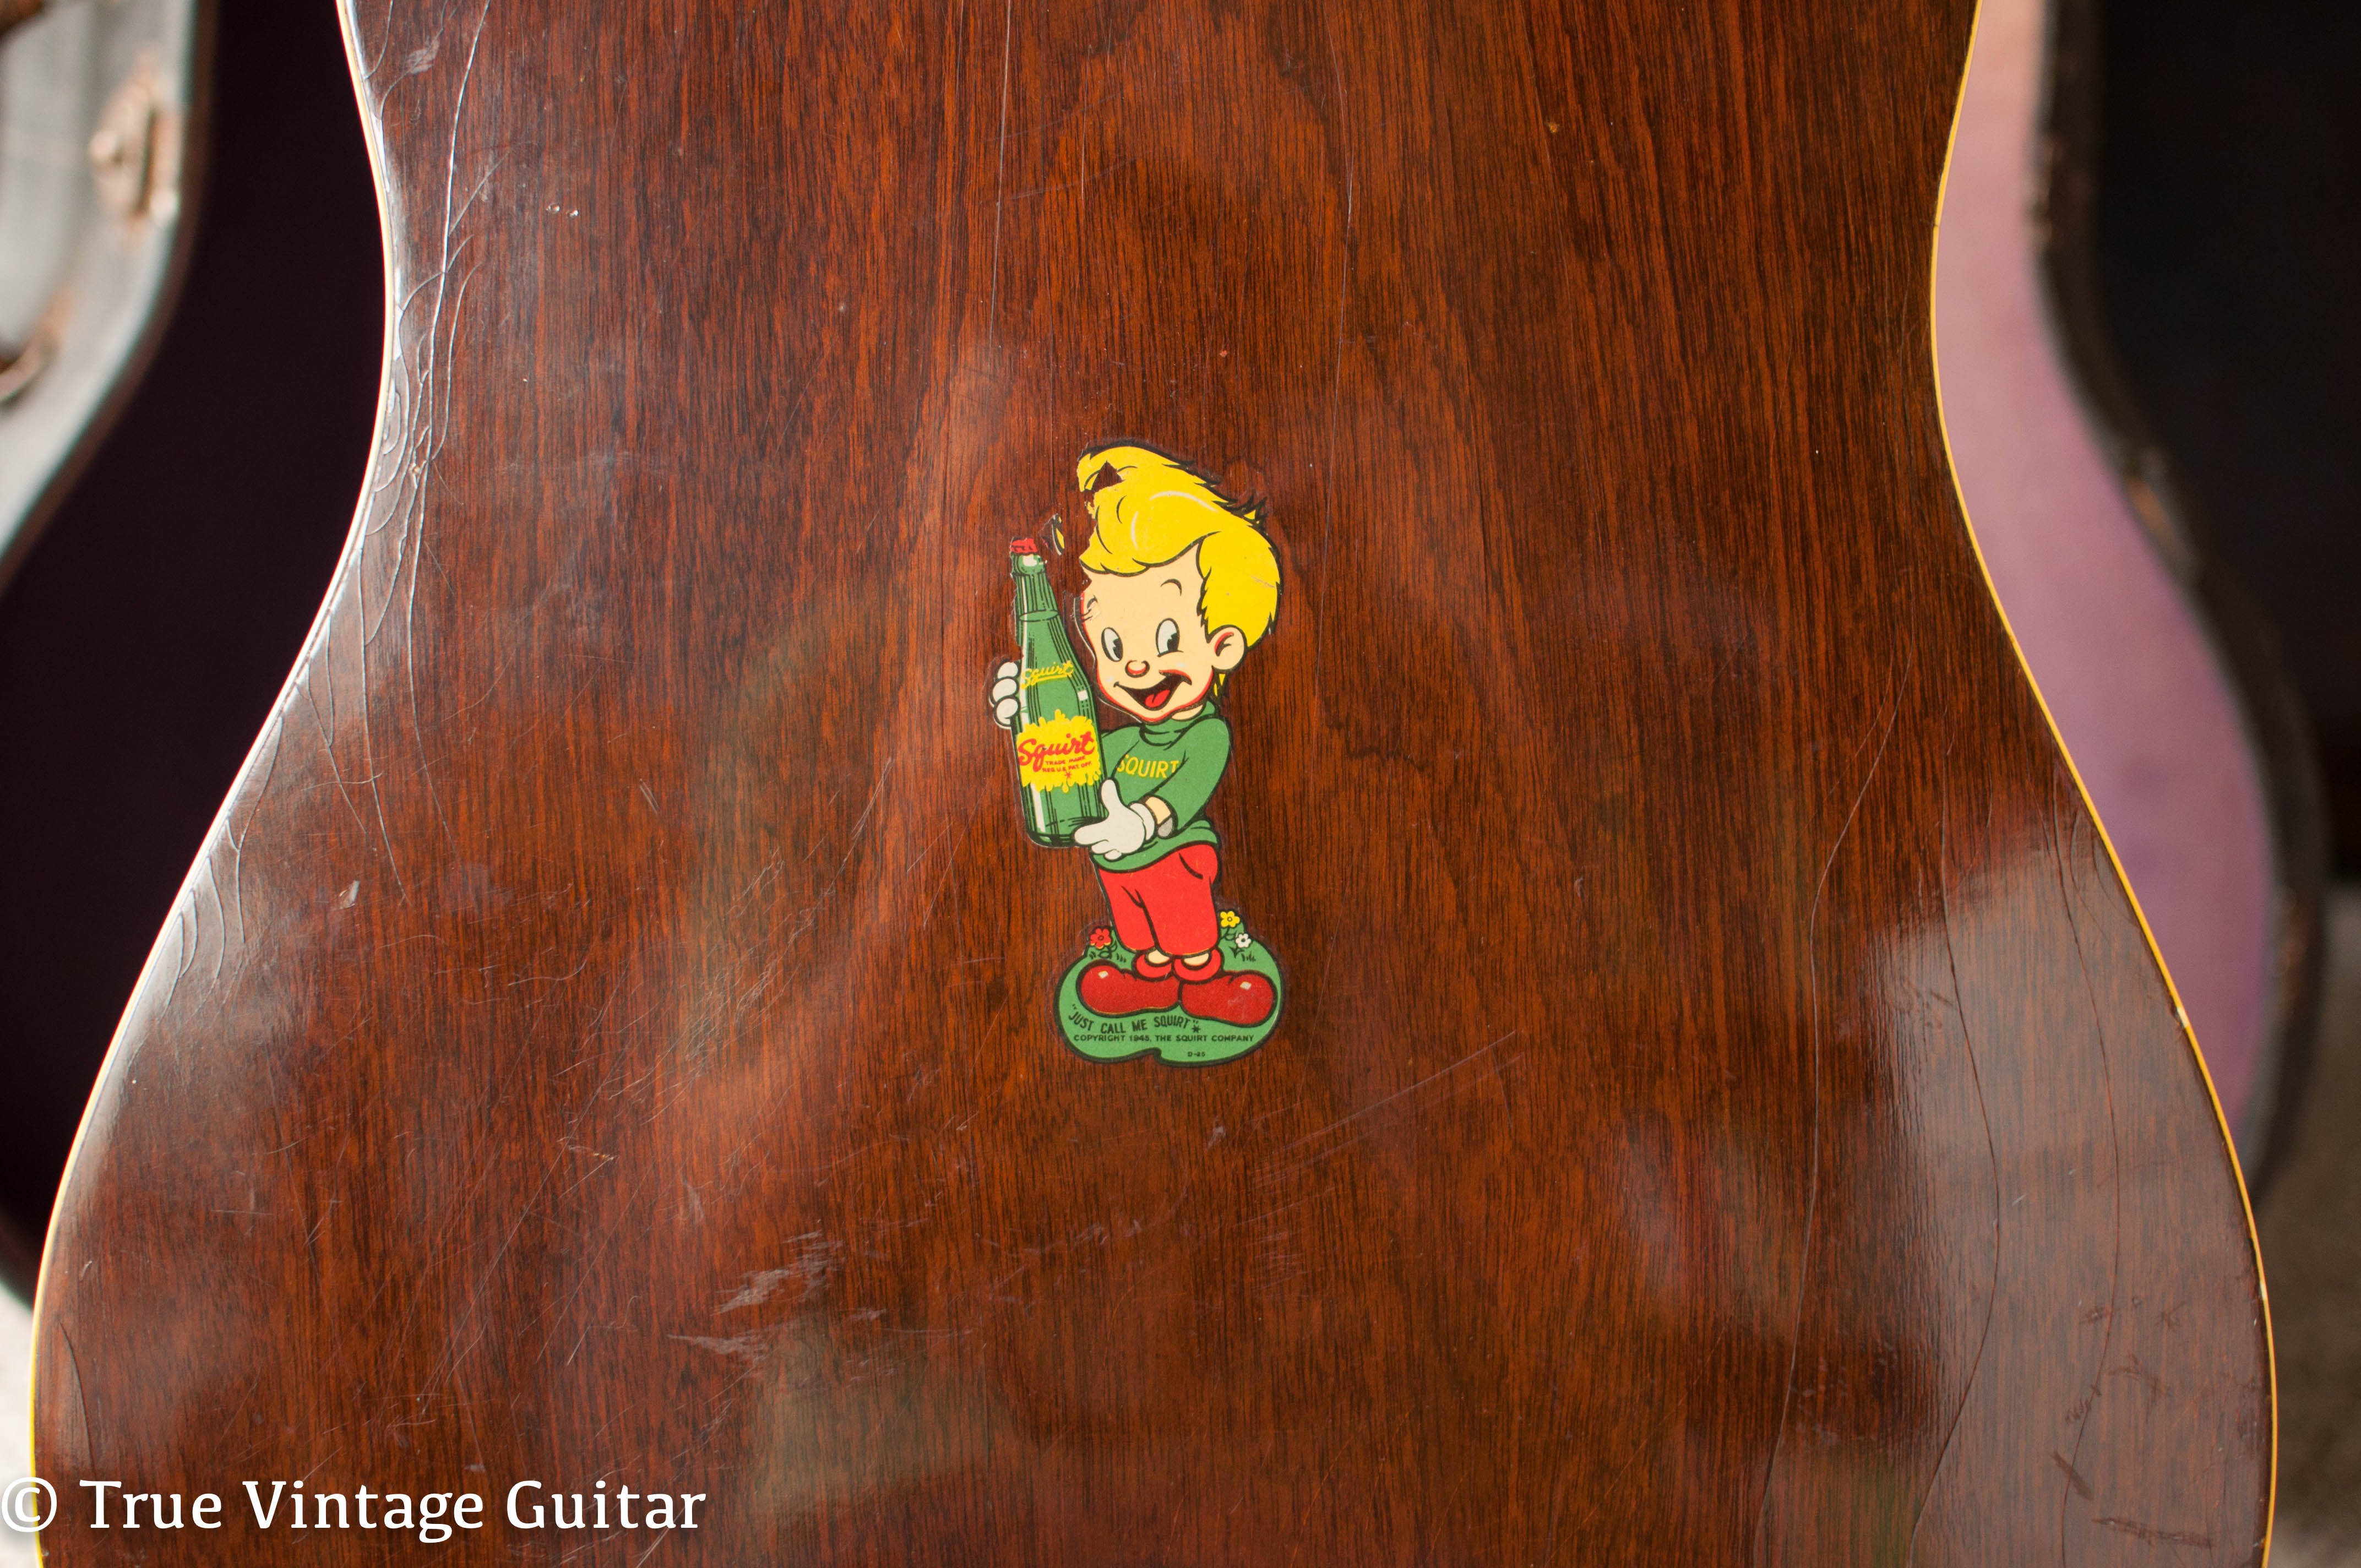 Squirt soda sticker, vintage Gibson acoustic guitar